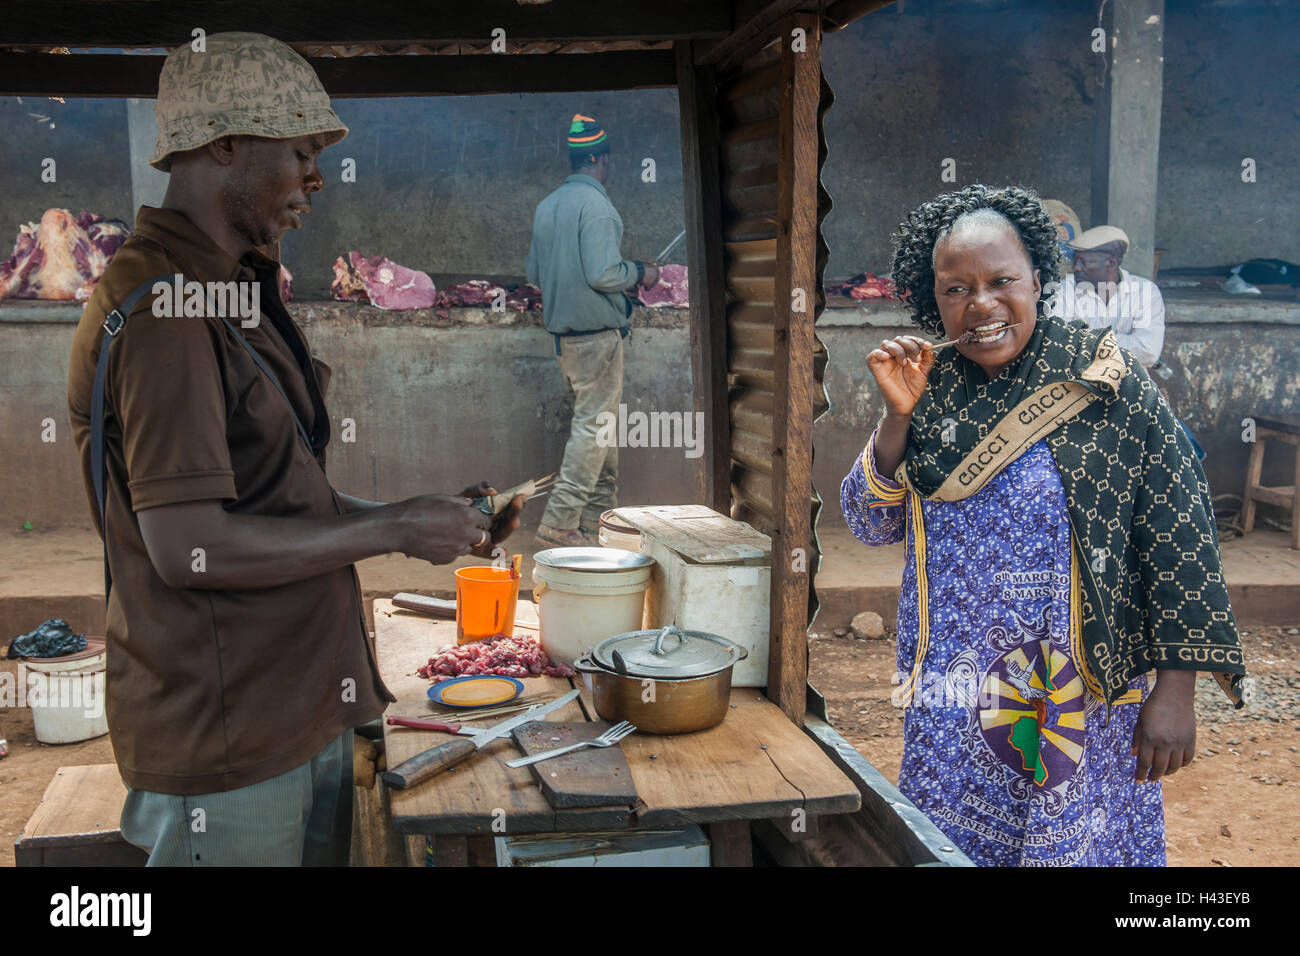 Woman eating grilled meat at street stand, street scene, Bamenda, North-West Region, Cameroon Stock Photo